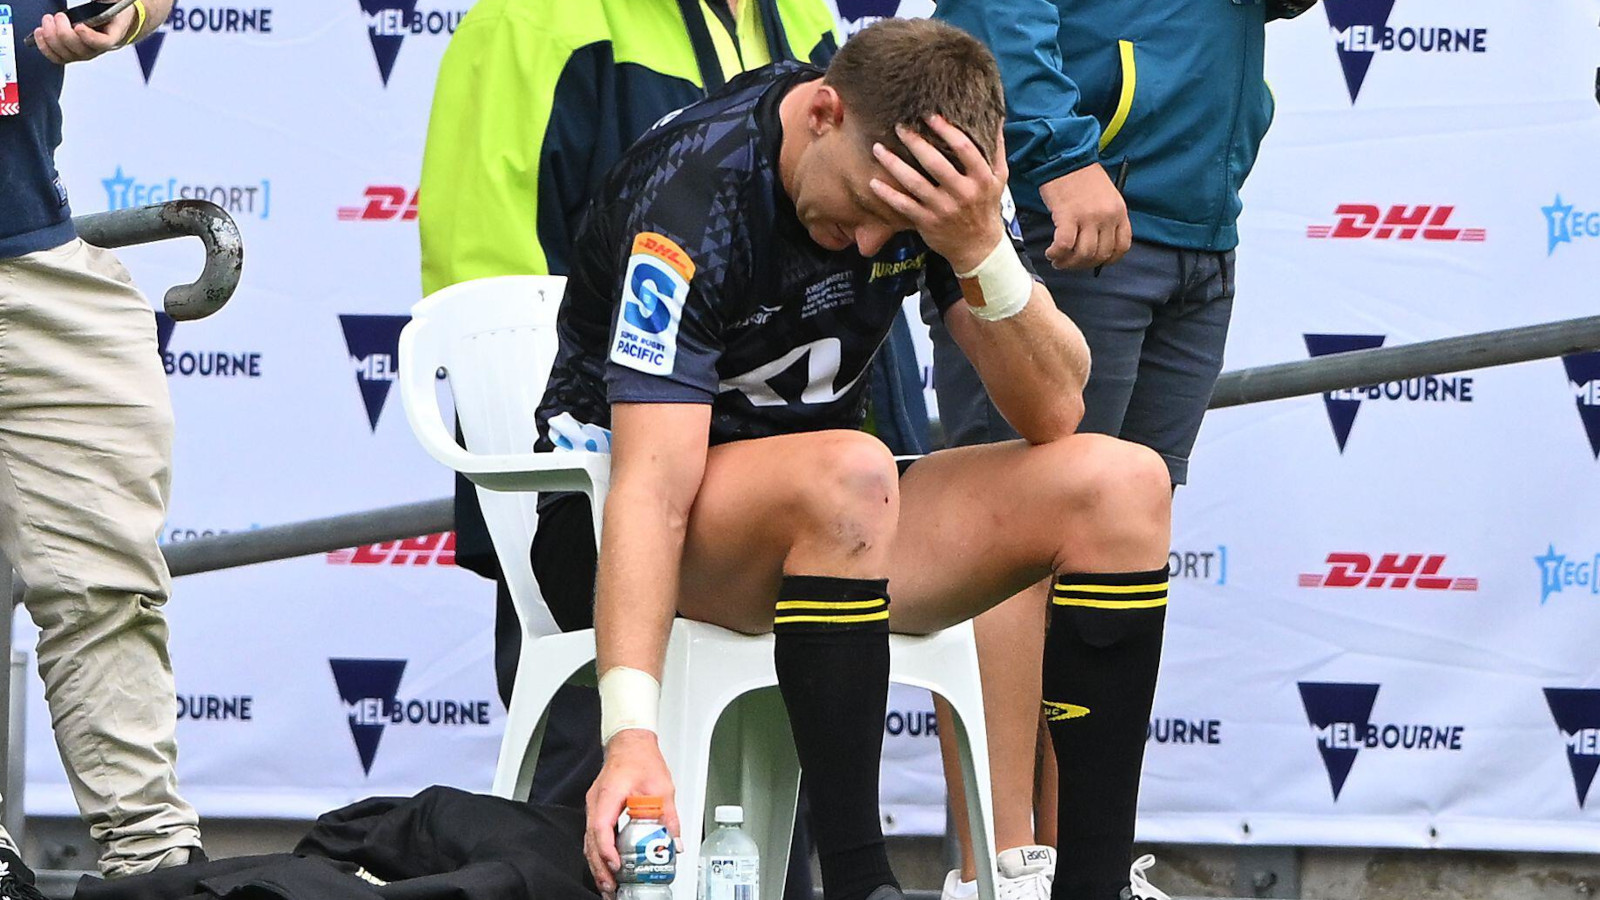 all black jordie barrett fails to learn rugby world cup lessons after ‘horrendous’ red card